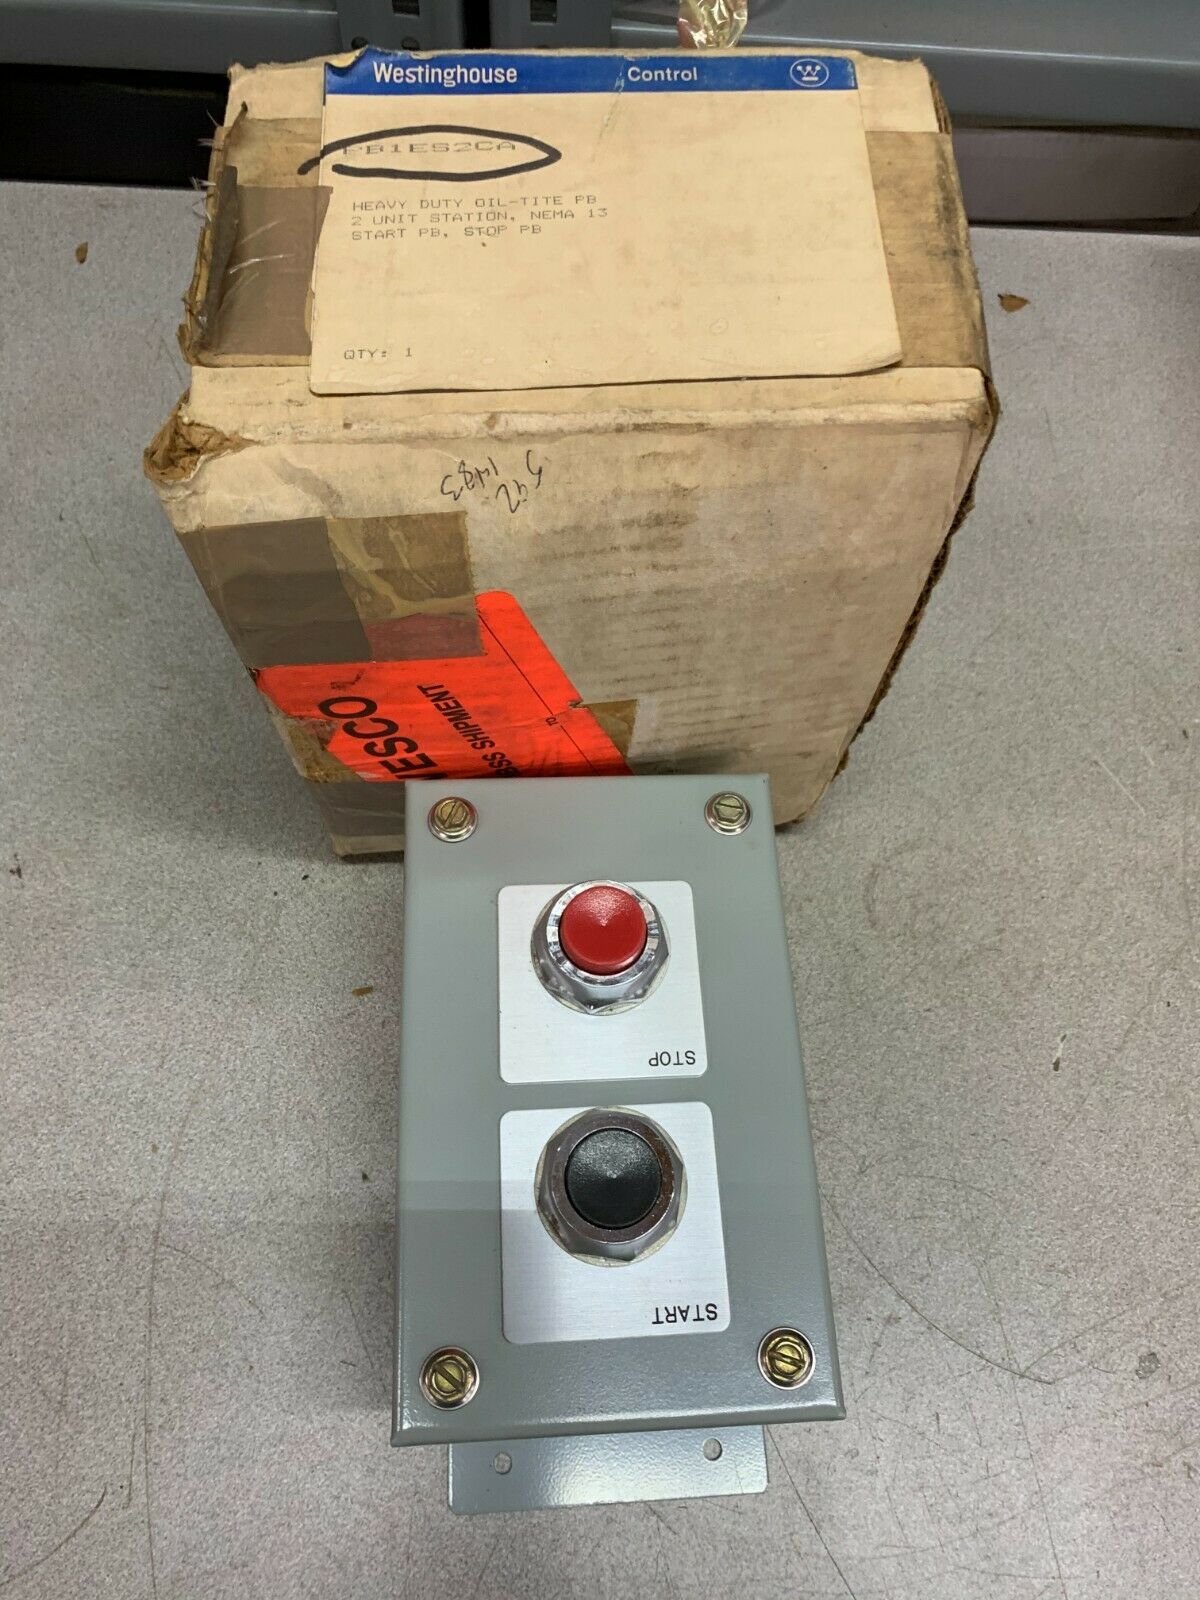 NEW IN BOX WESTINGHOUSE PUSHBUTTON STATION PB1ES2CA